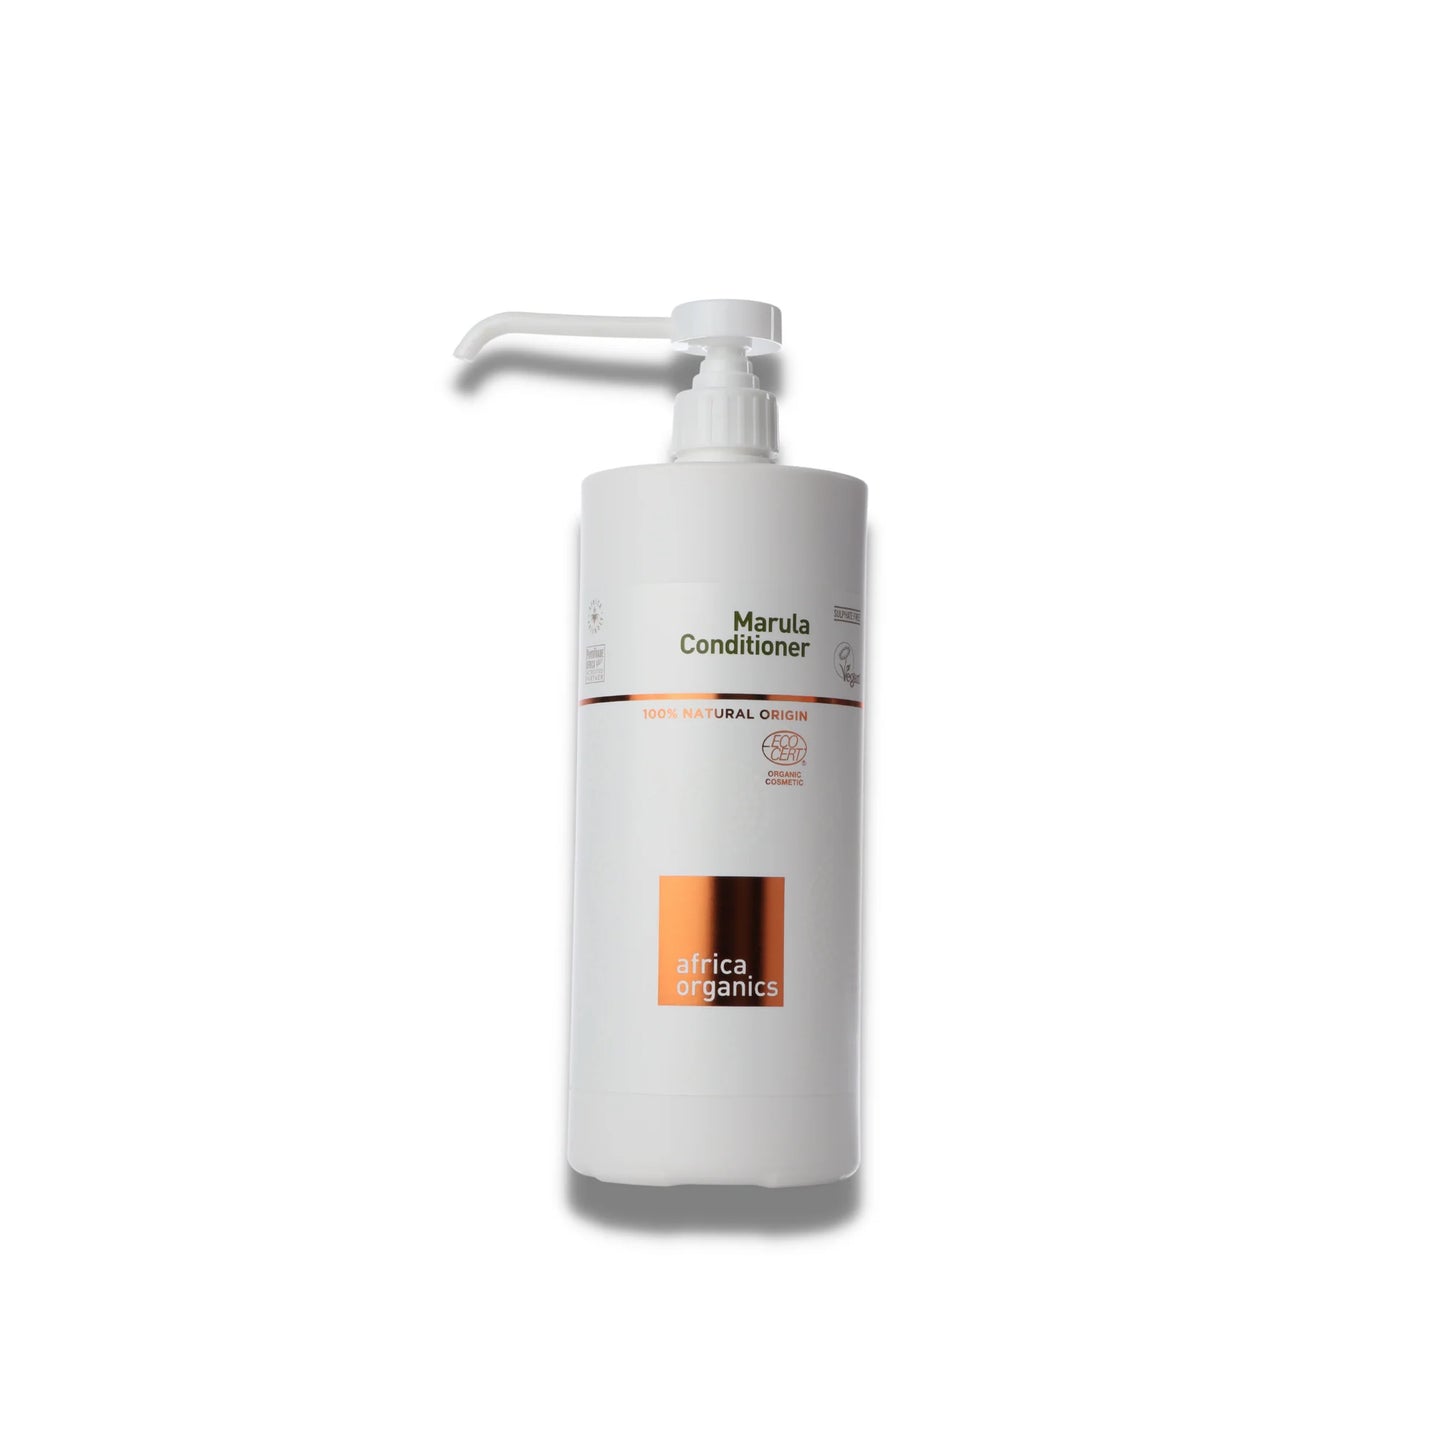 Marula Oil Shampoo for normal hair, enriched with natural extracts for nourishment and freshness.